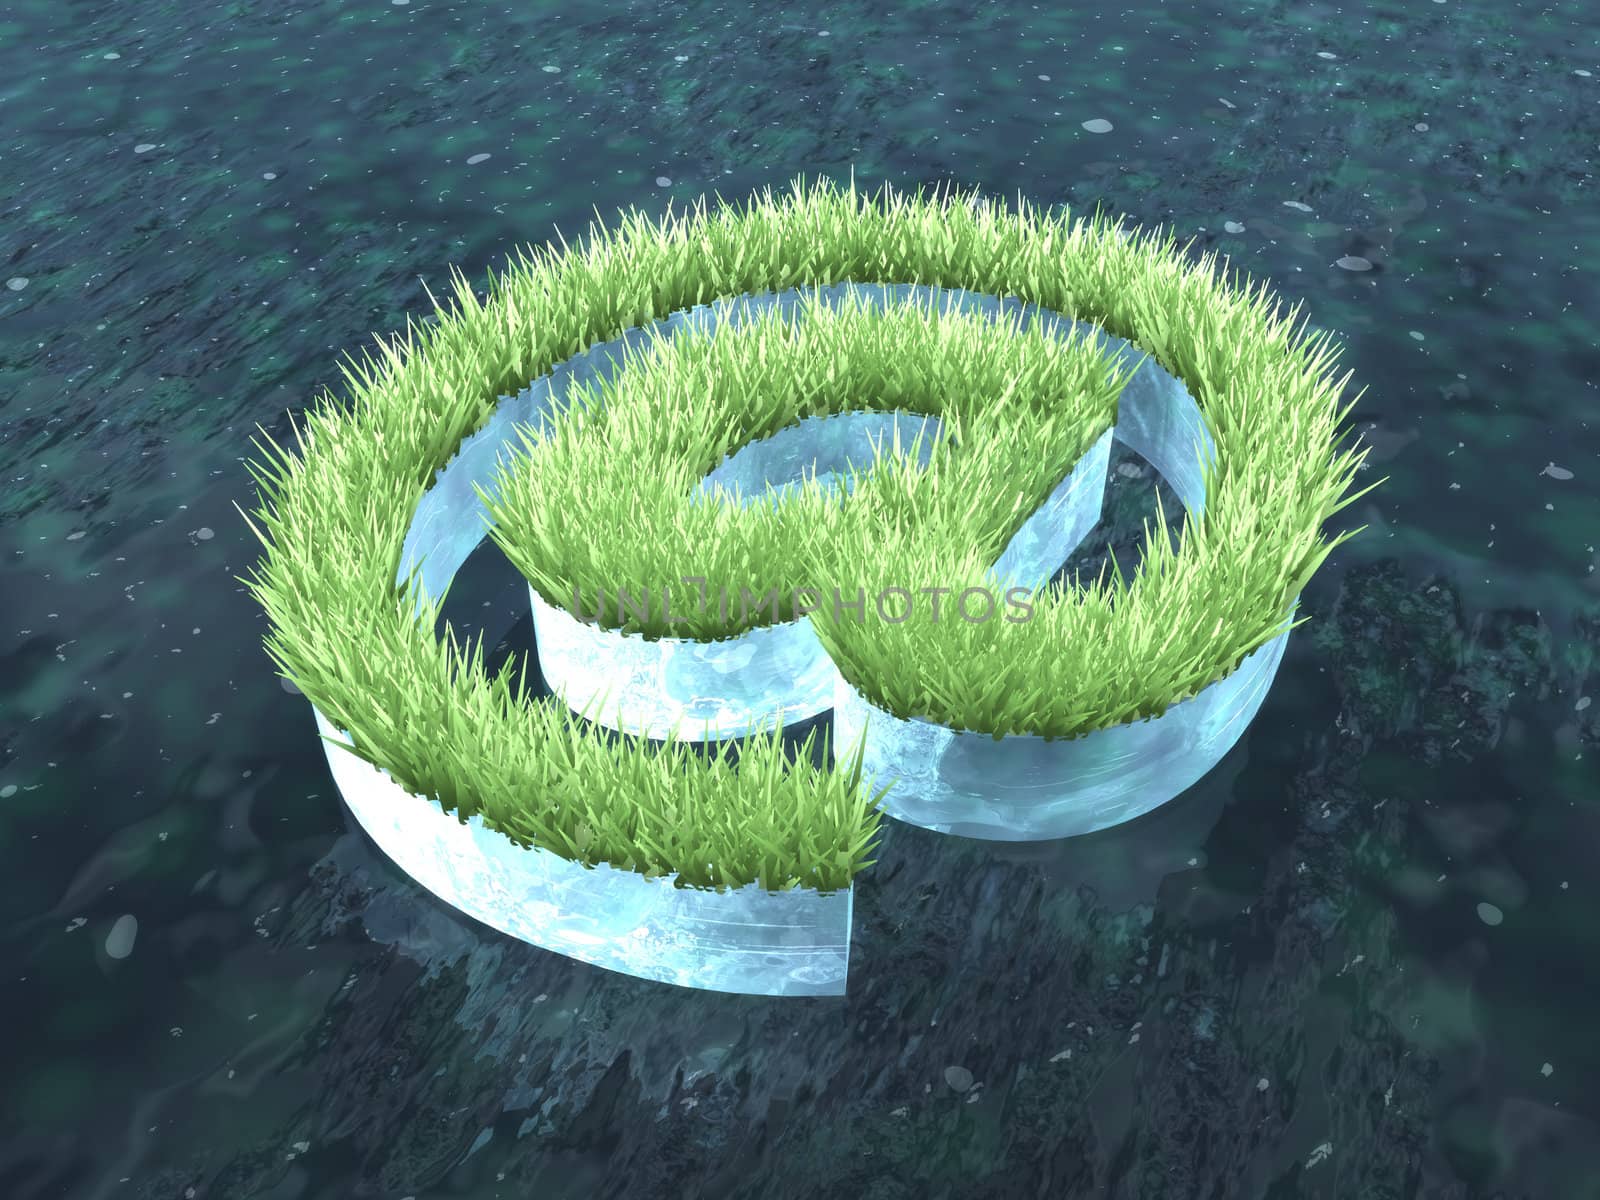 Grass growing on an ice at symbol.